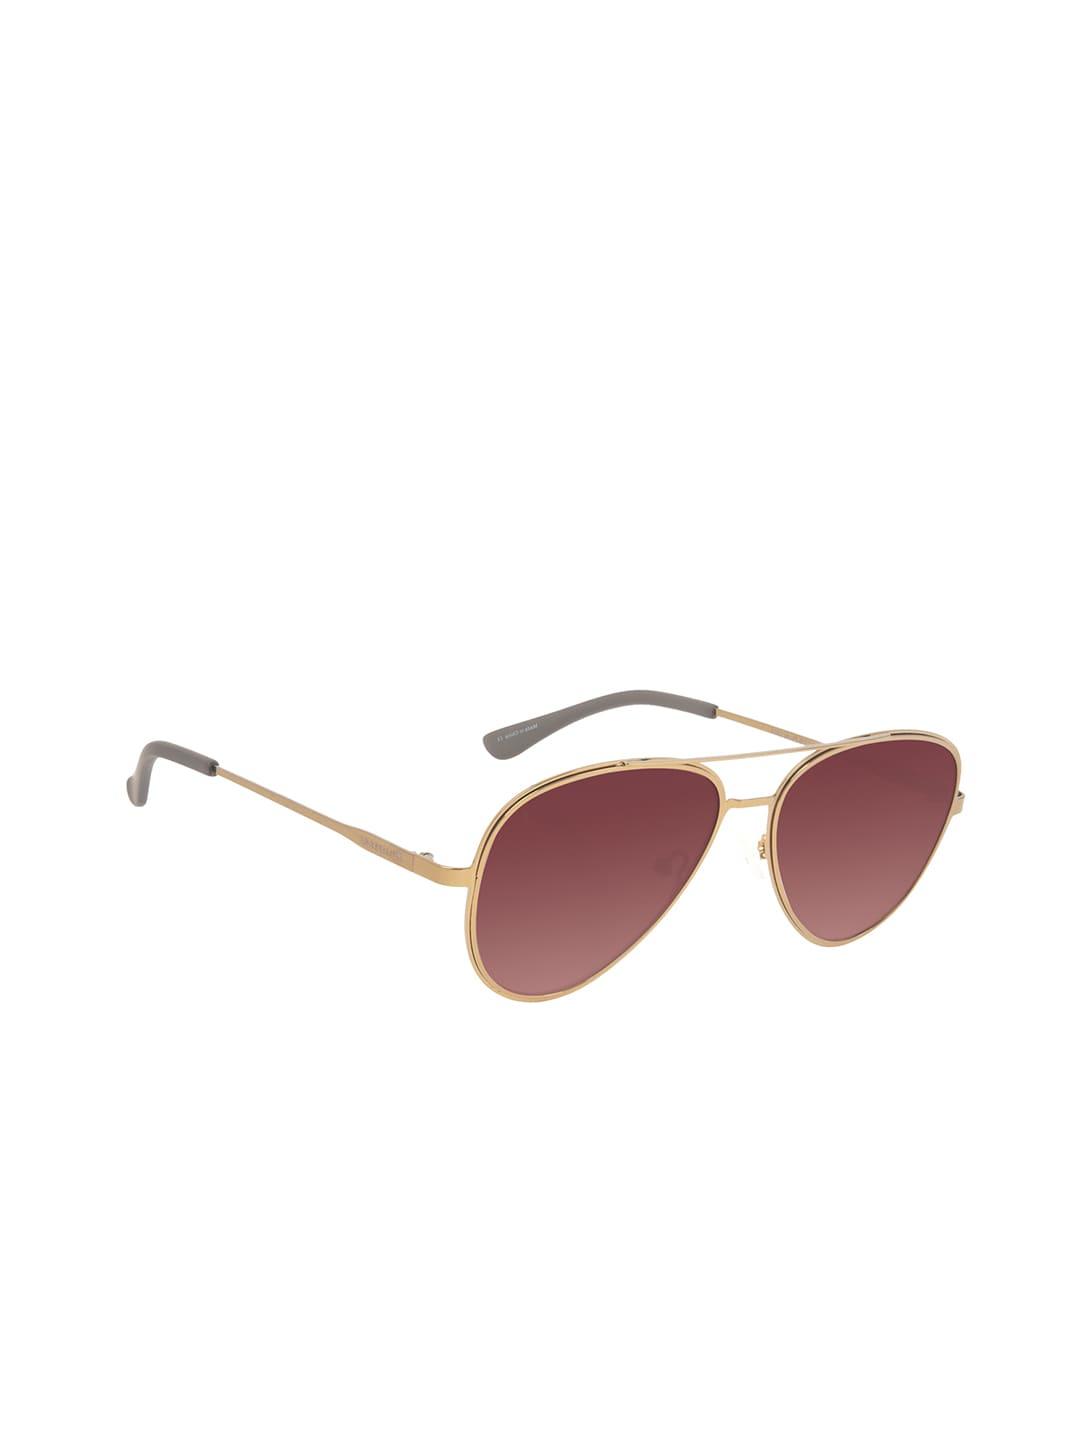 Chilli Beans Unisex Grey Lens & Gold-Toned Aviator Sunglasses with UV Protected Lens